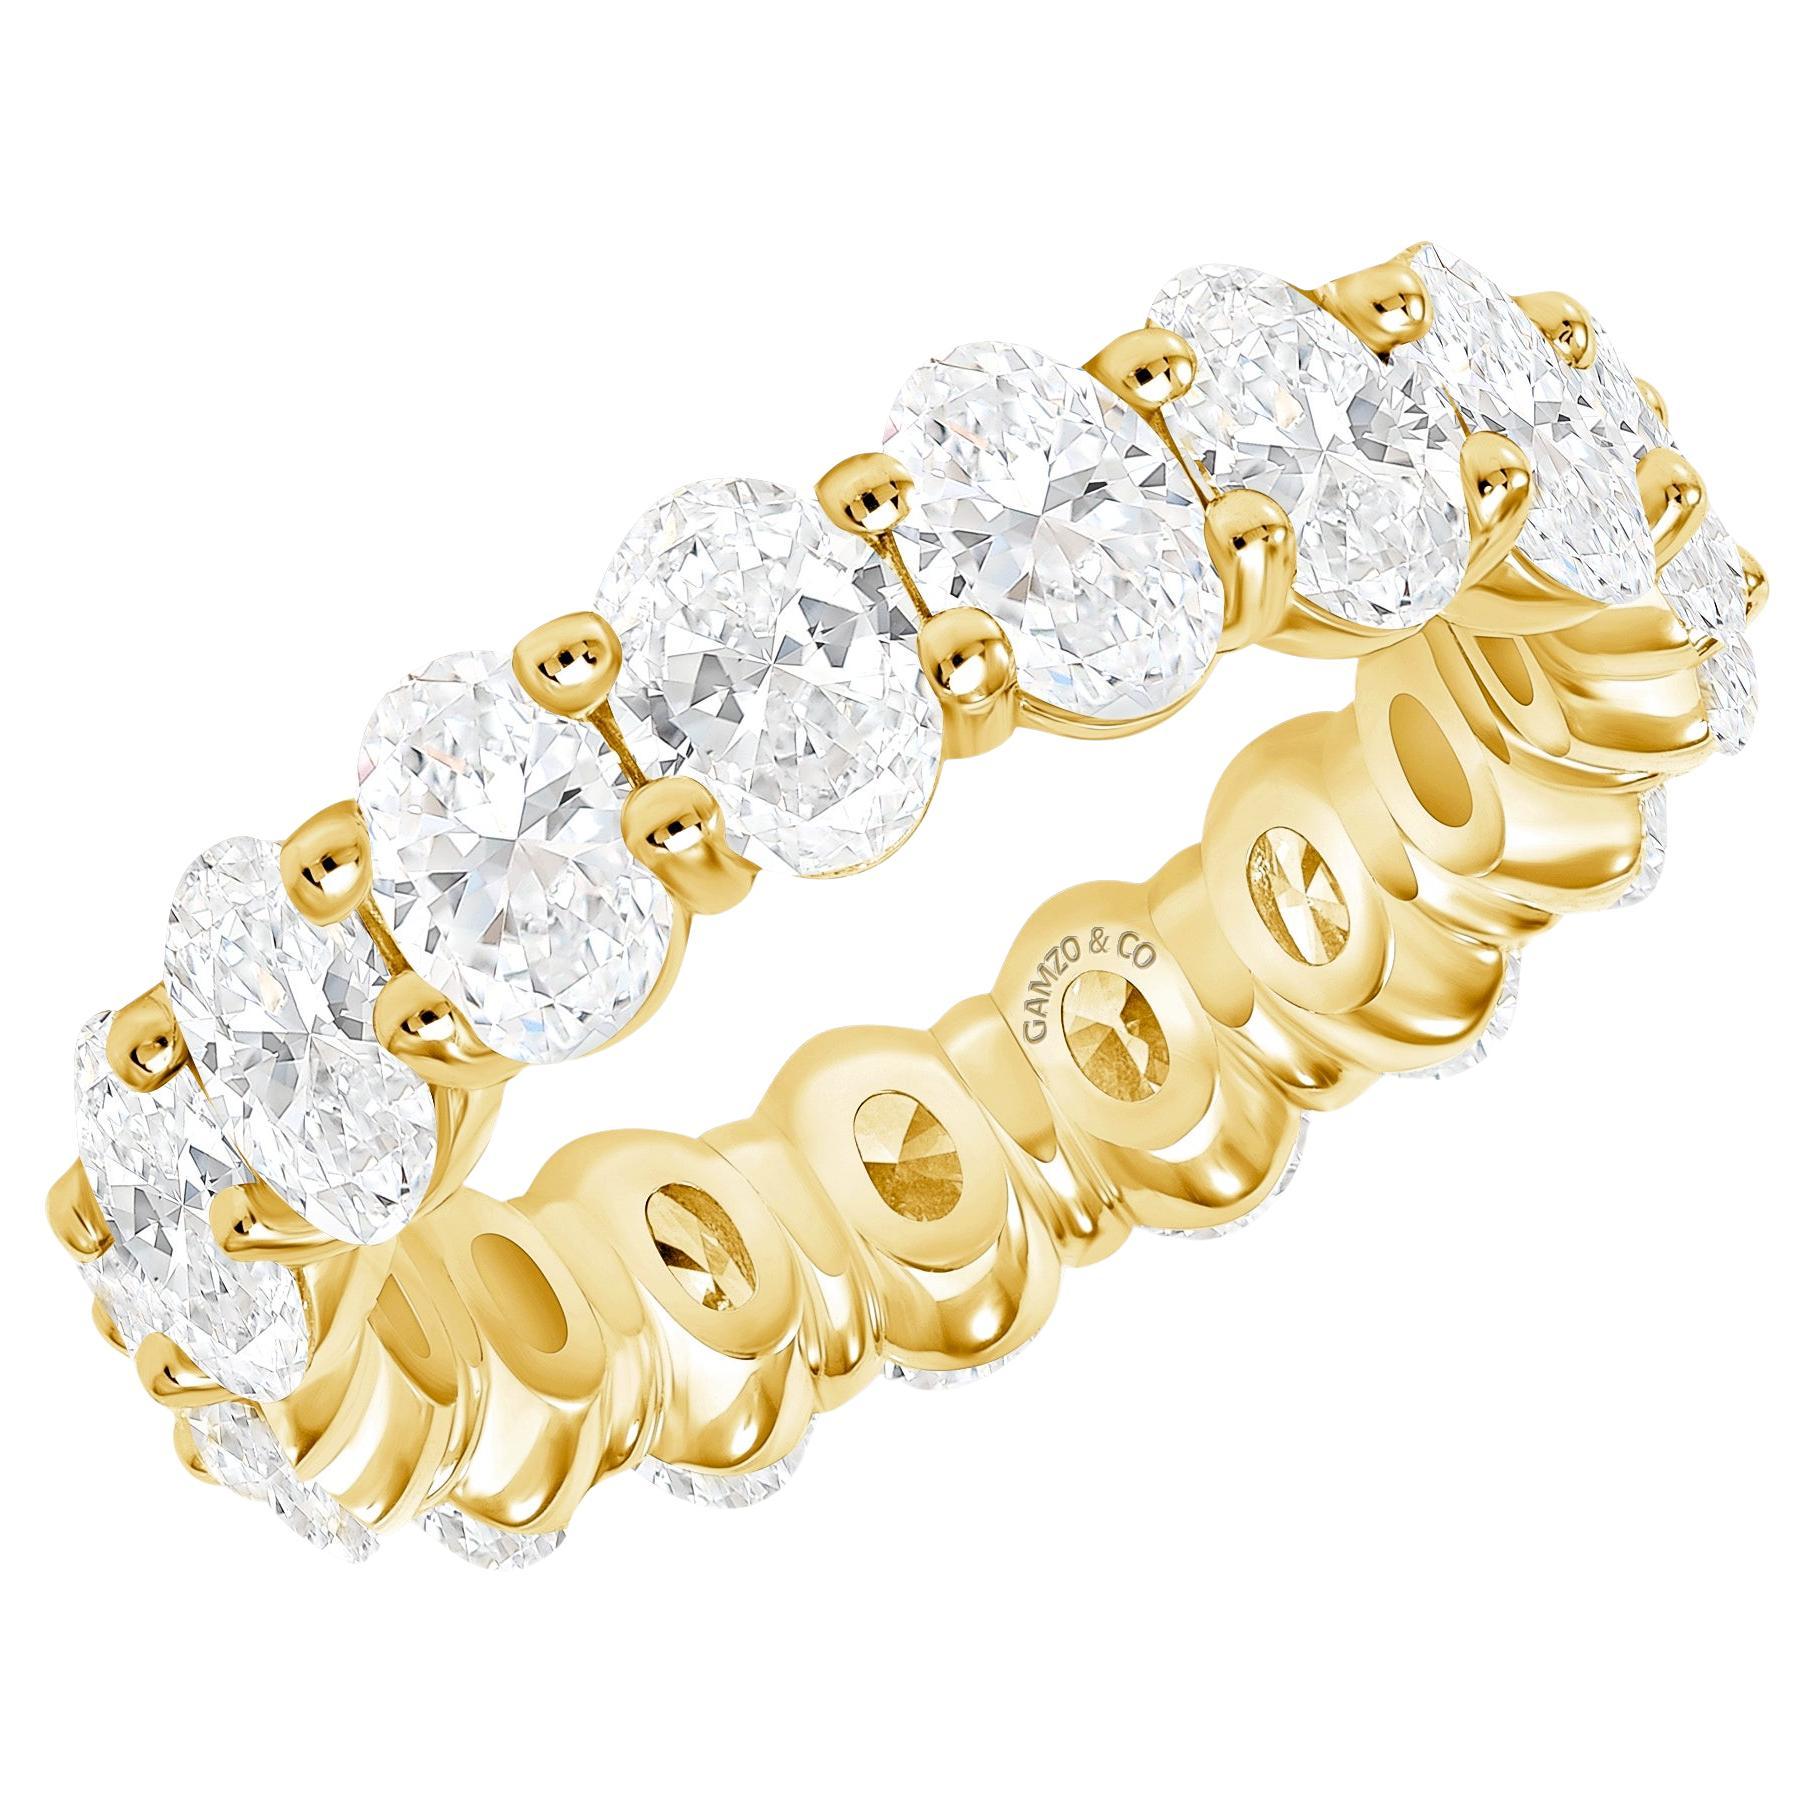 For Sale:  18k Yellow Gold 8 Carat Oval Cut Natural Diamond Eternity Ring